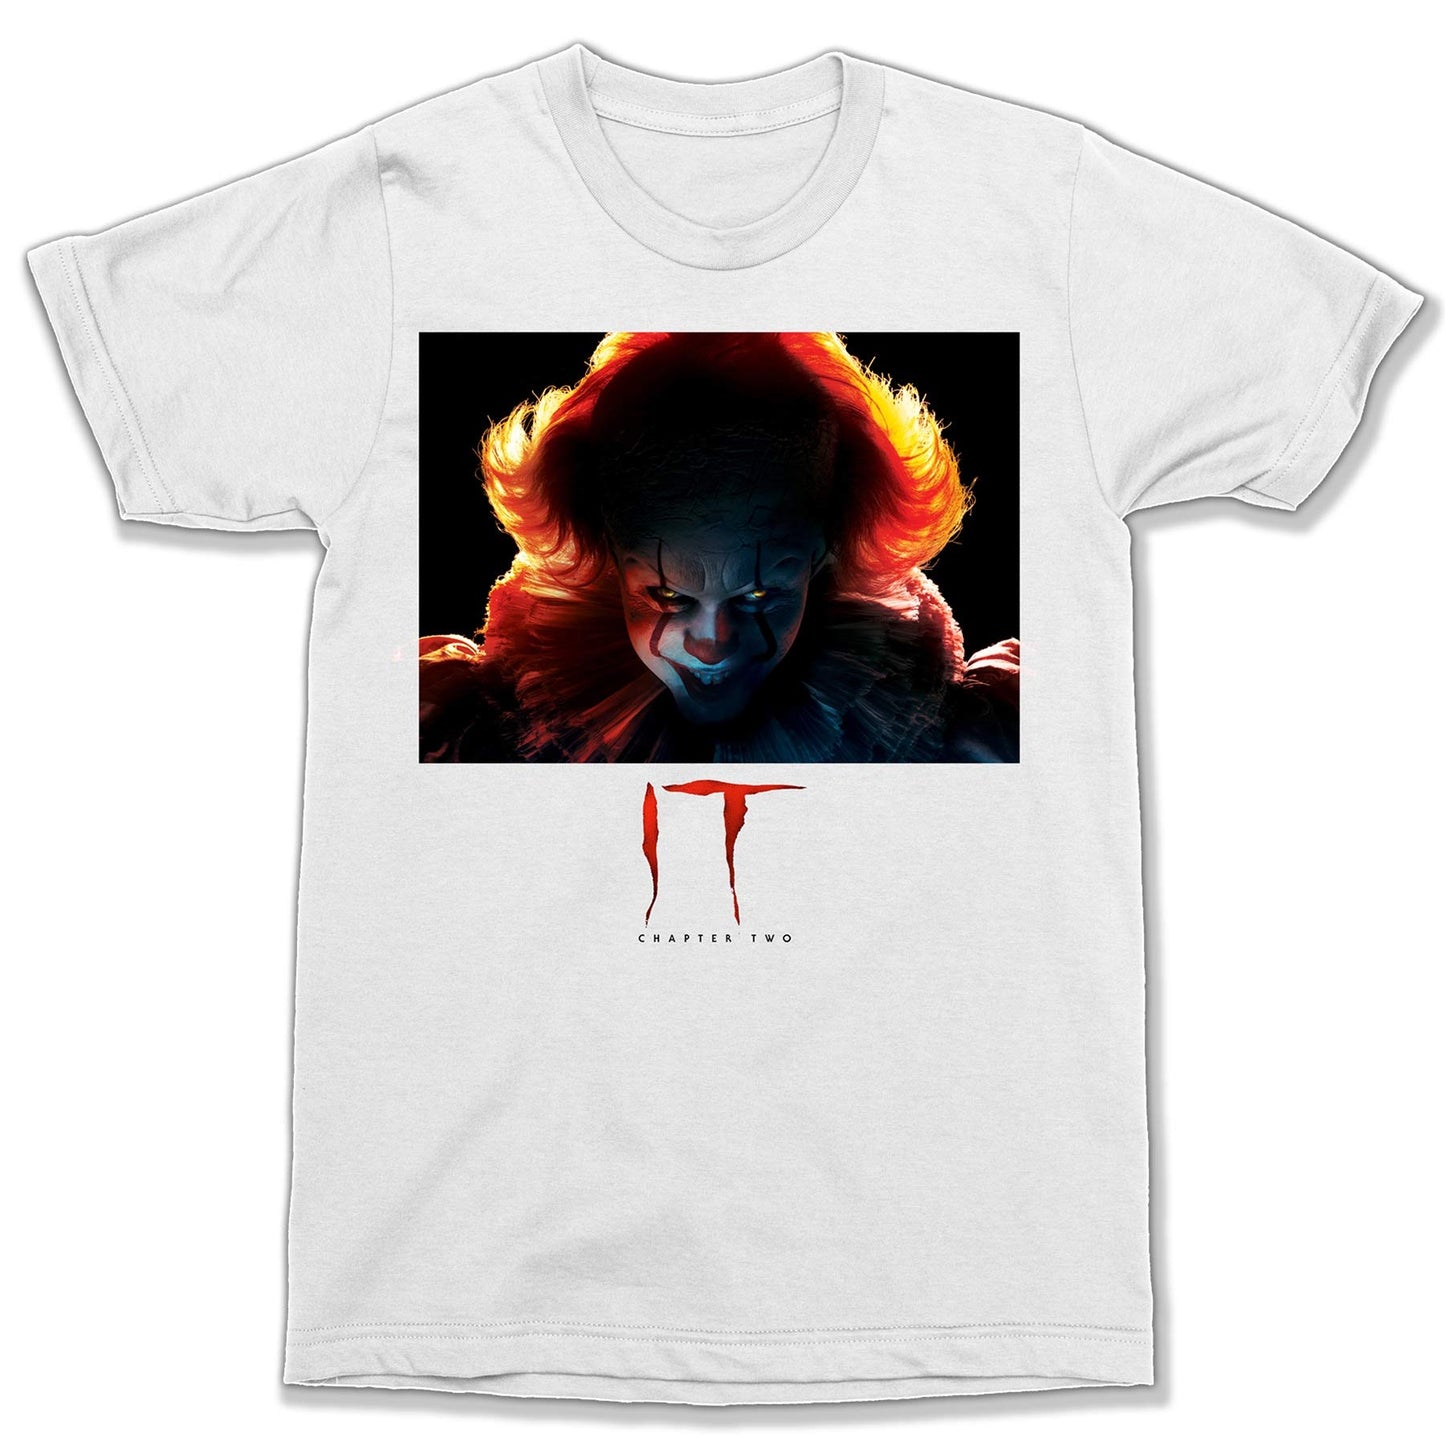 Pennywise IT Chapter 2 Clown Horror Box Face Men's T-Shirt, White, Large